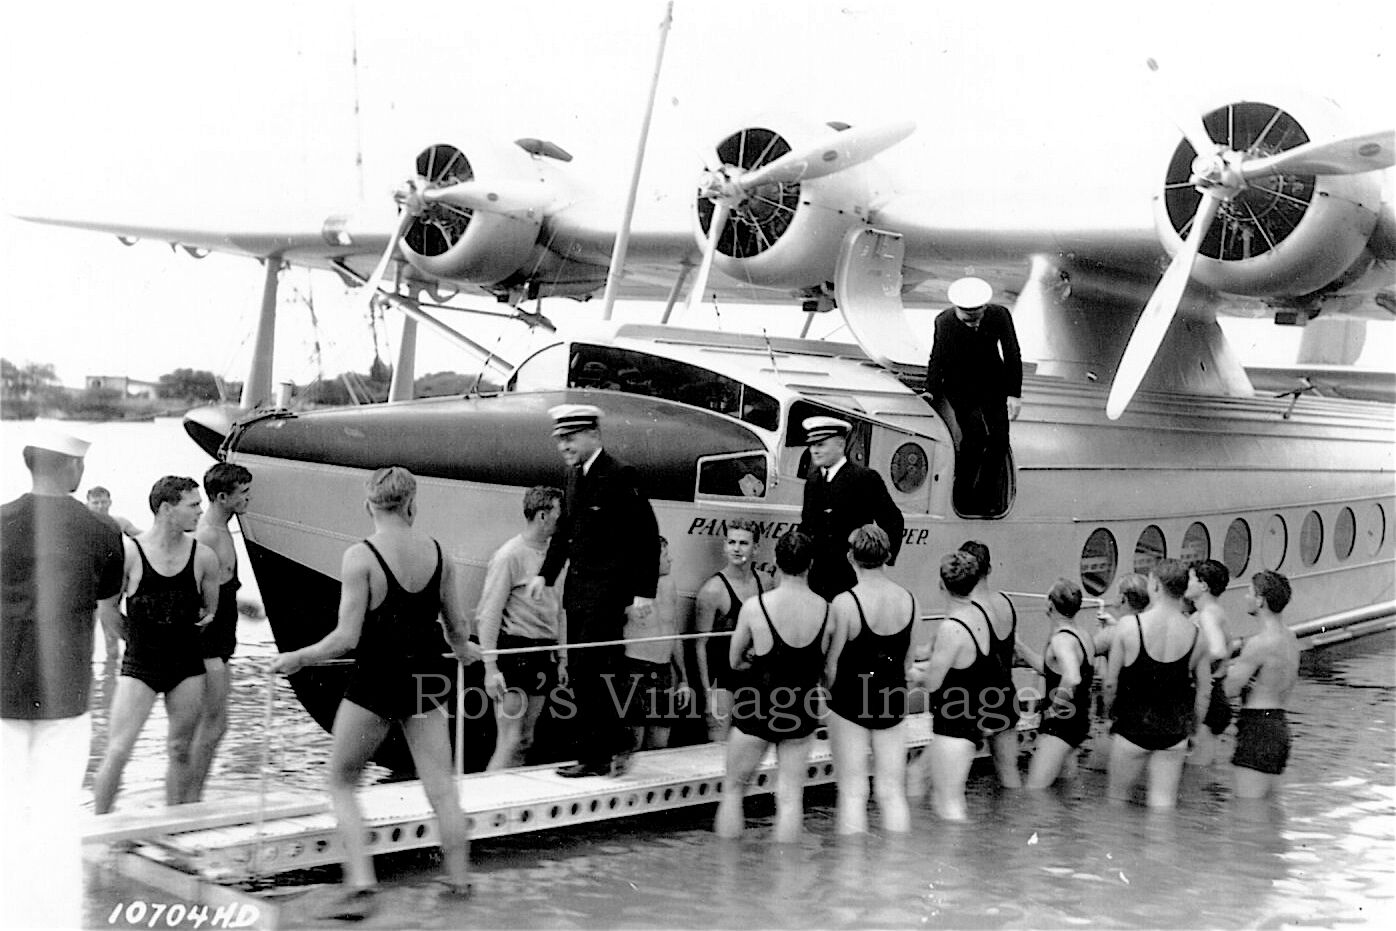  Pan Am Clipper Sikorsky S-42 Airplane Flying Boat 1935s in Honolulu  photo   